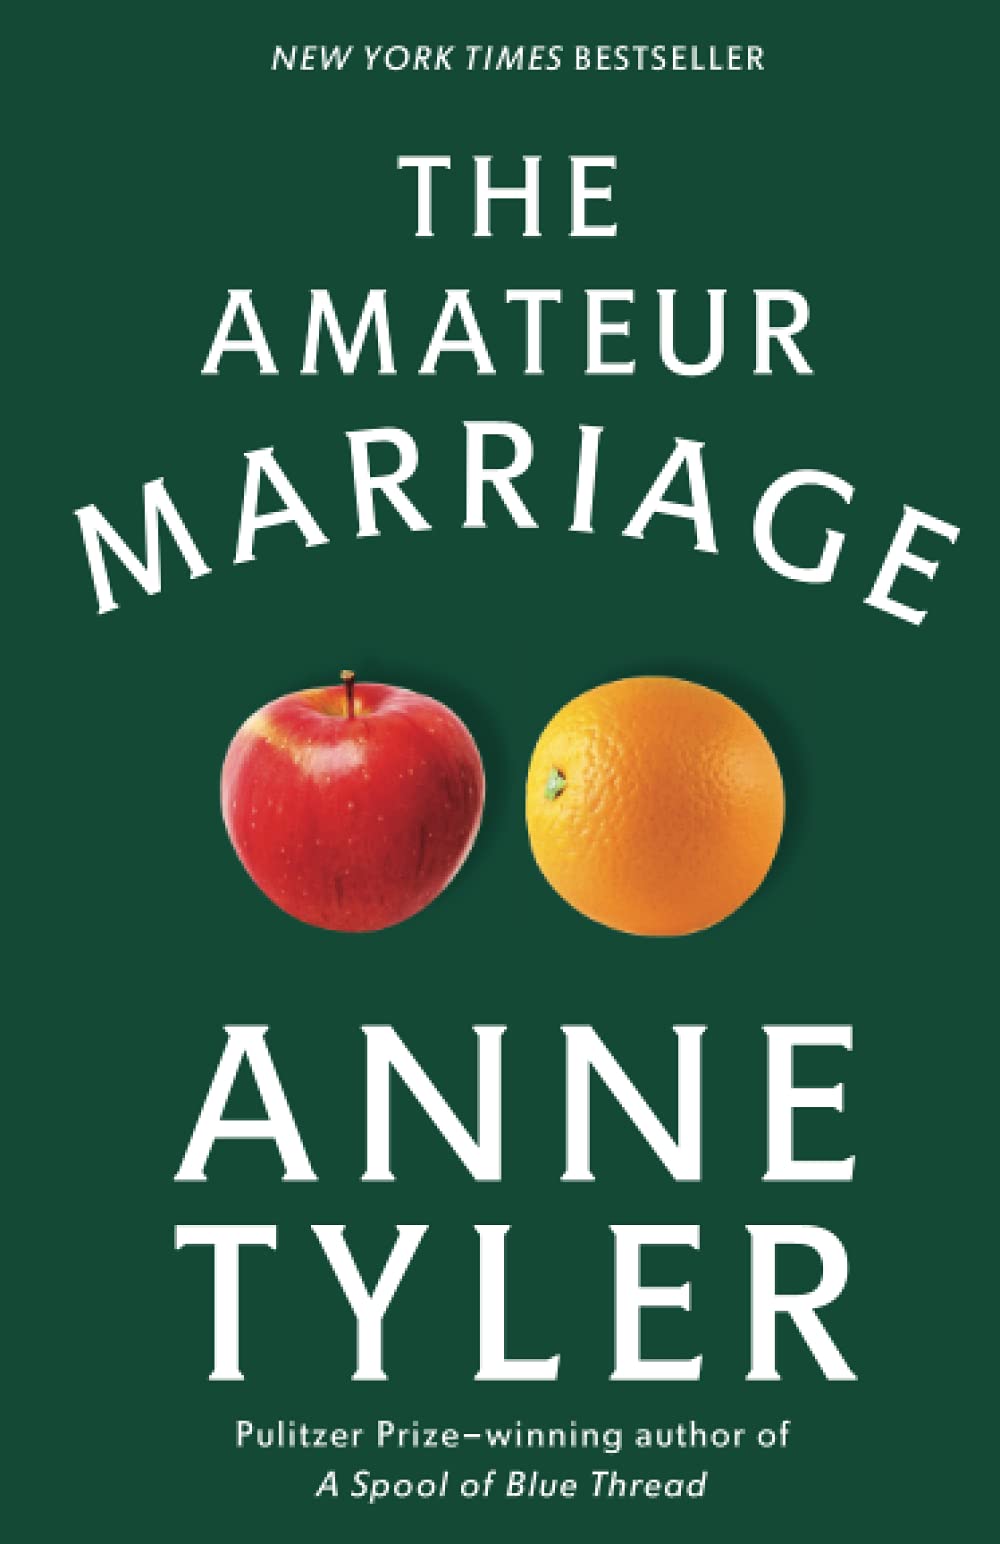 THE AMATEUR MARRIAGE